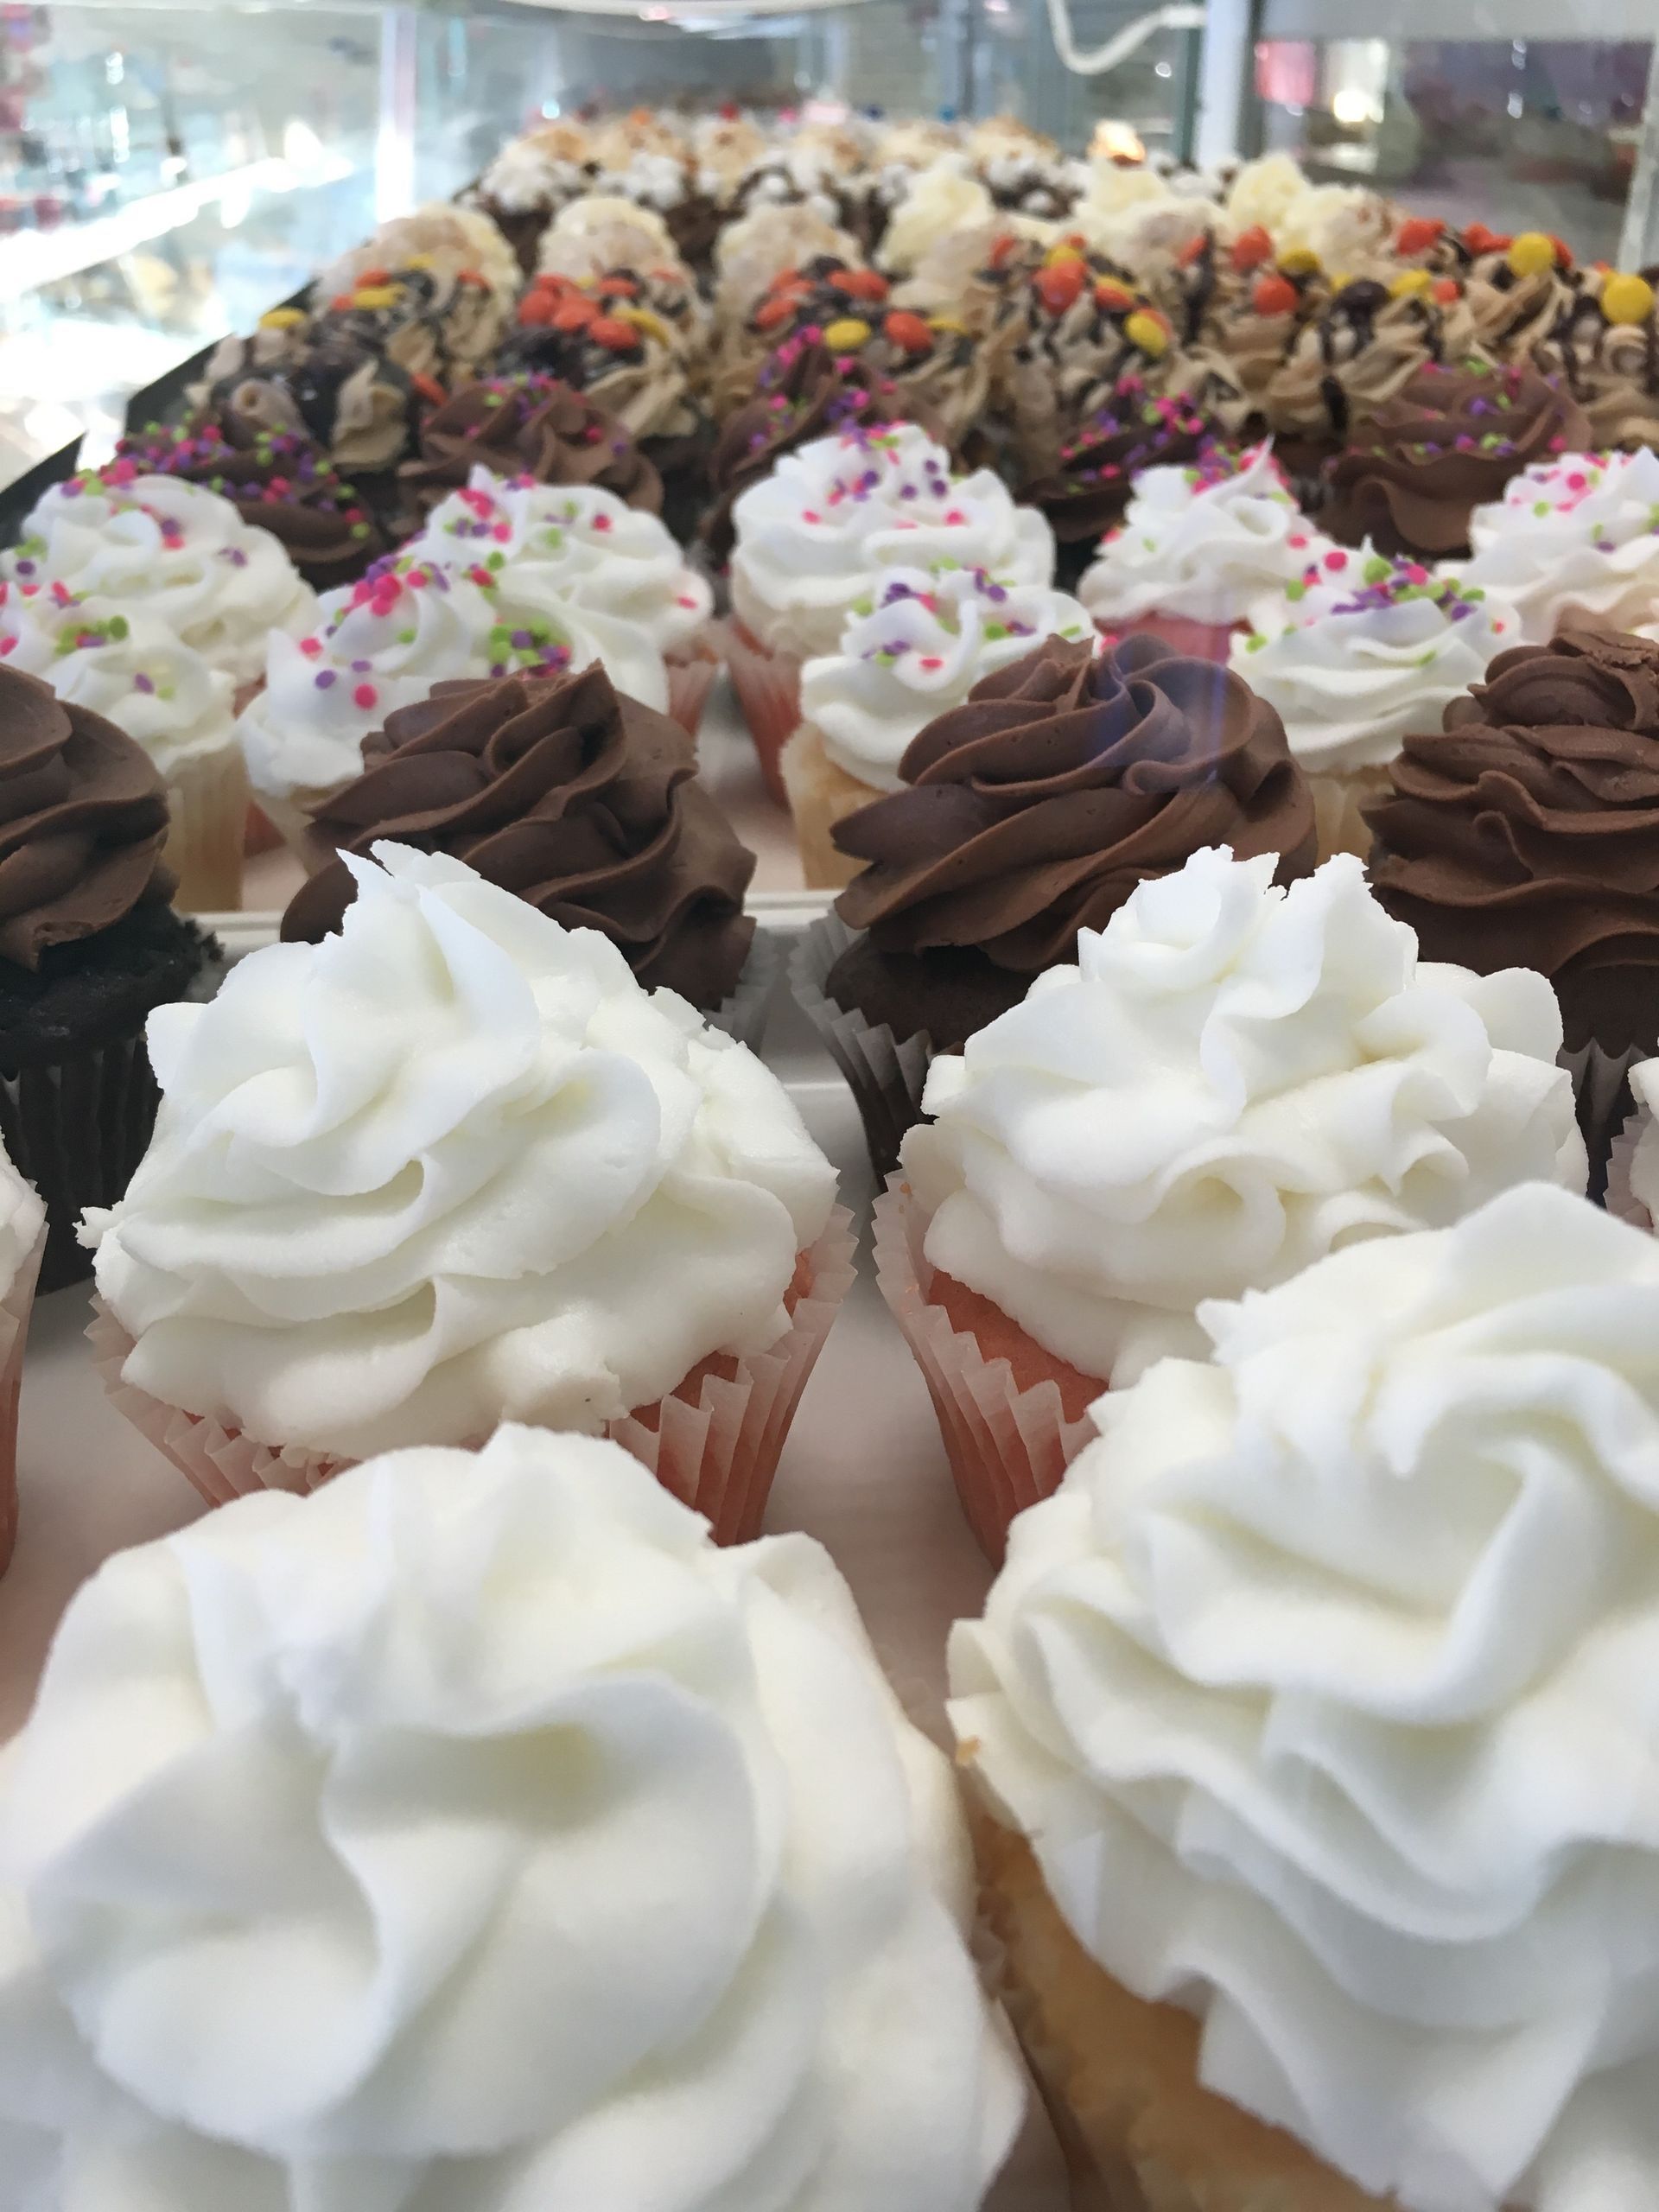 rows of cupcakes